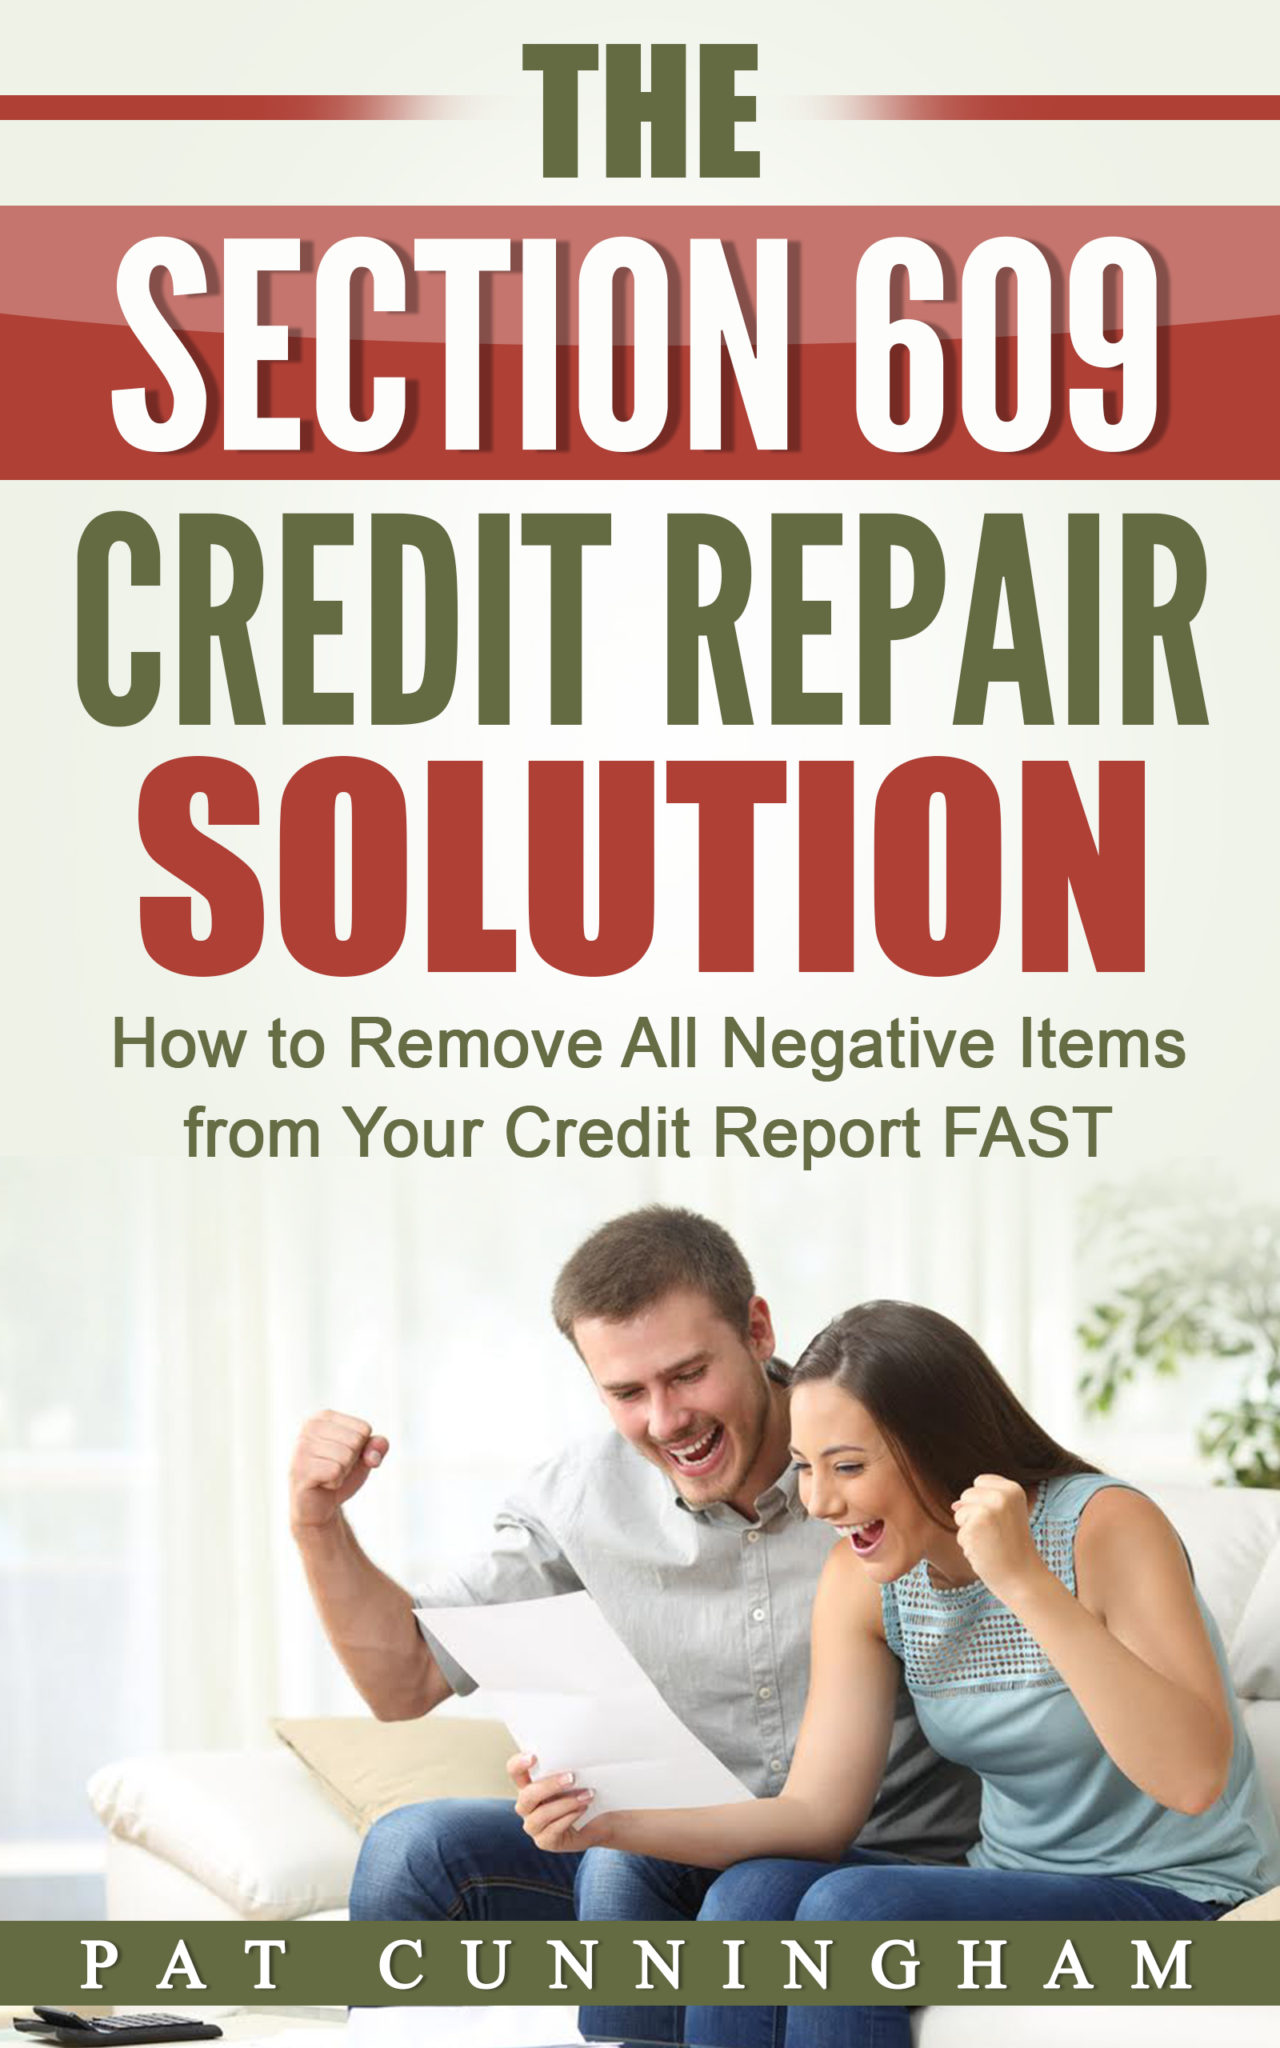 FREE: The Section 609 Credit Repair Solution: How to Remove All Negative Items from Your Credit Report FAST by Pat Cunningham